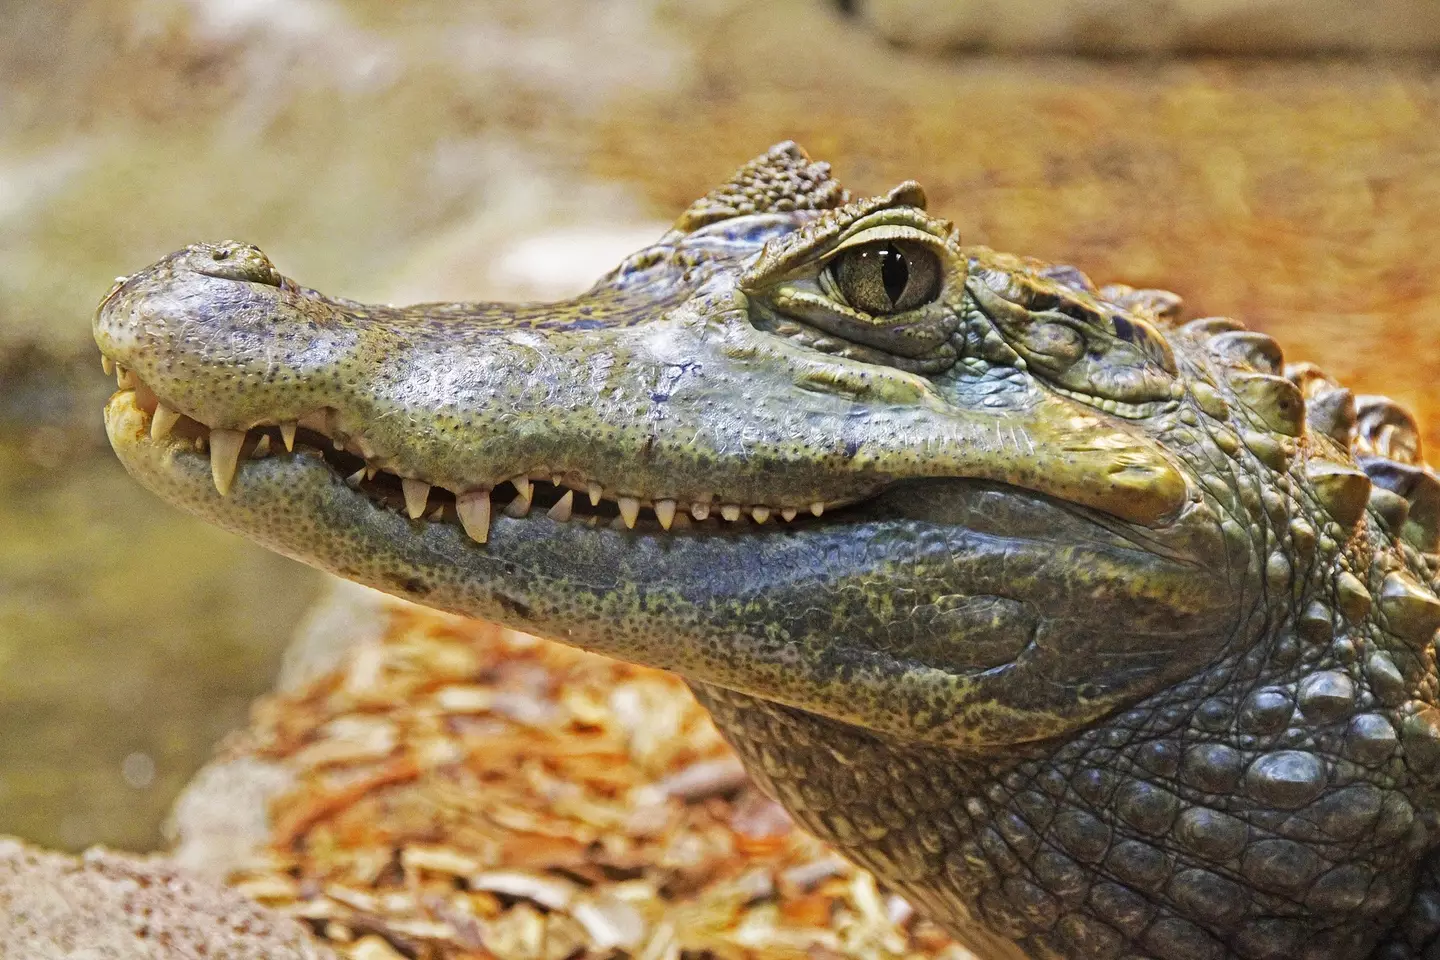 The research also suggests alligators may have once swam in the North Pole waters.